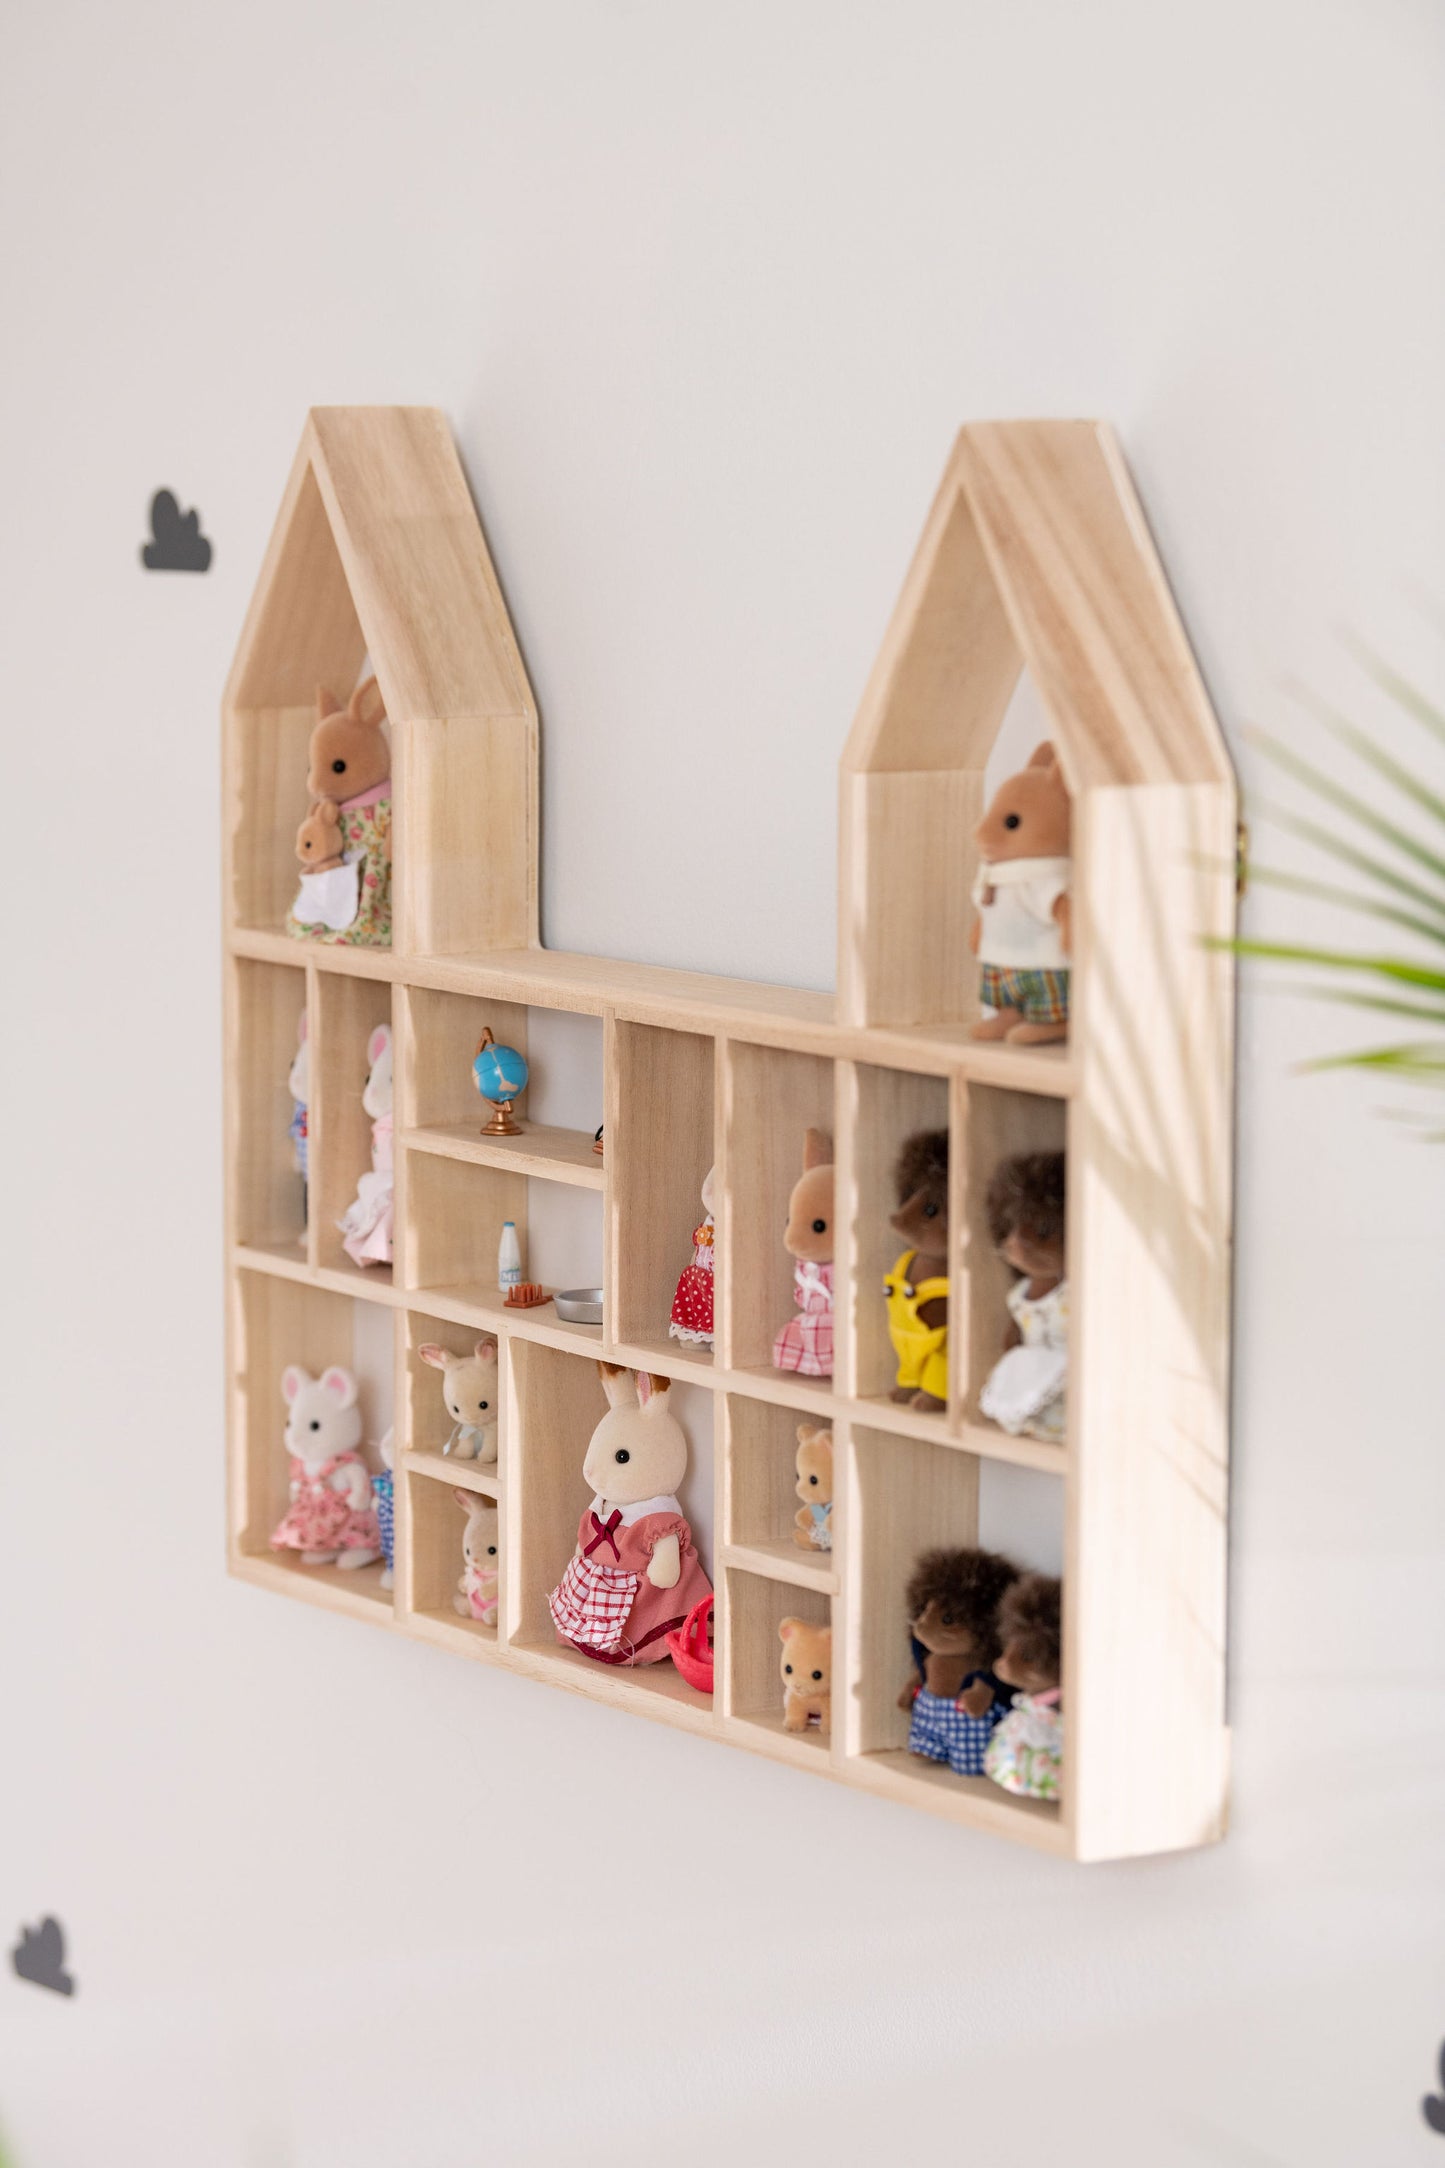 A side view of a castle-shaped wooden toy display shelf with Calico Critters hung on the wall